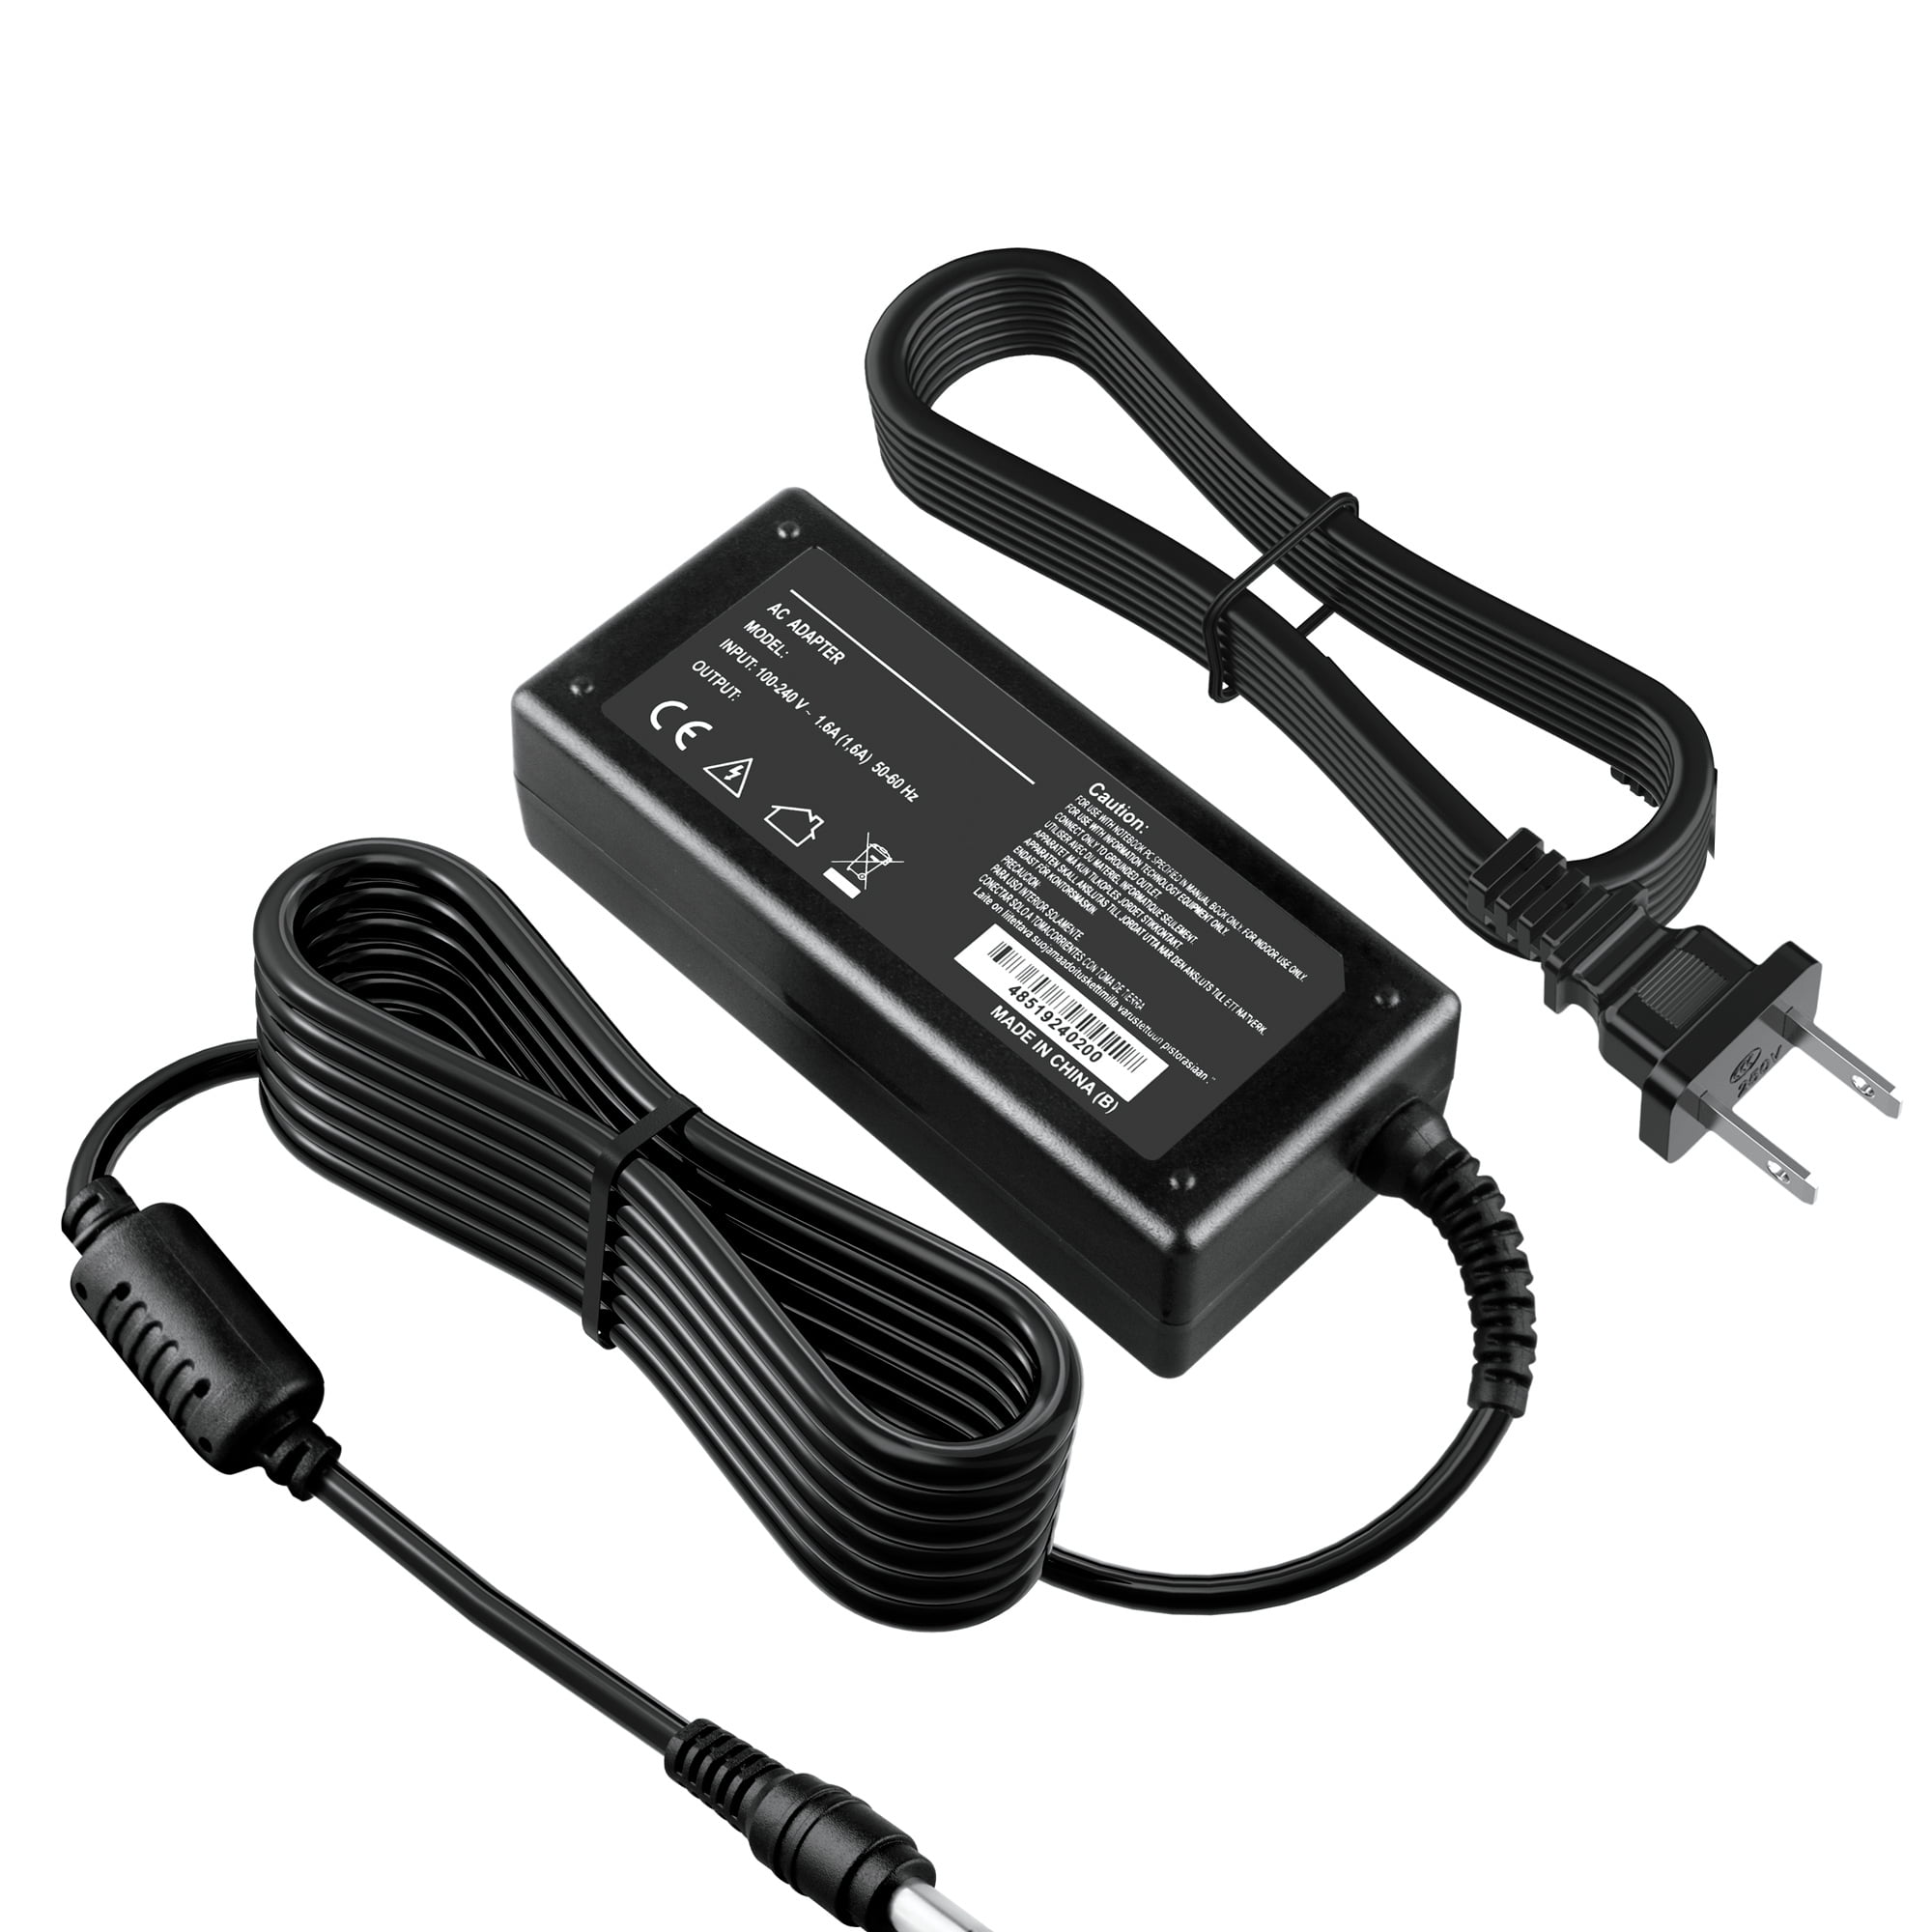  PK Power AC/DC Adapter for GVE Model: GM150-2400500  GM1502400500 Audio/Video Apparatus 24V 5.0A Power Supply Cord Cable PS  Charger Mains PSU (with Barrel Round Plug Tip.) : Electronics